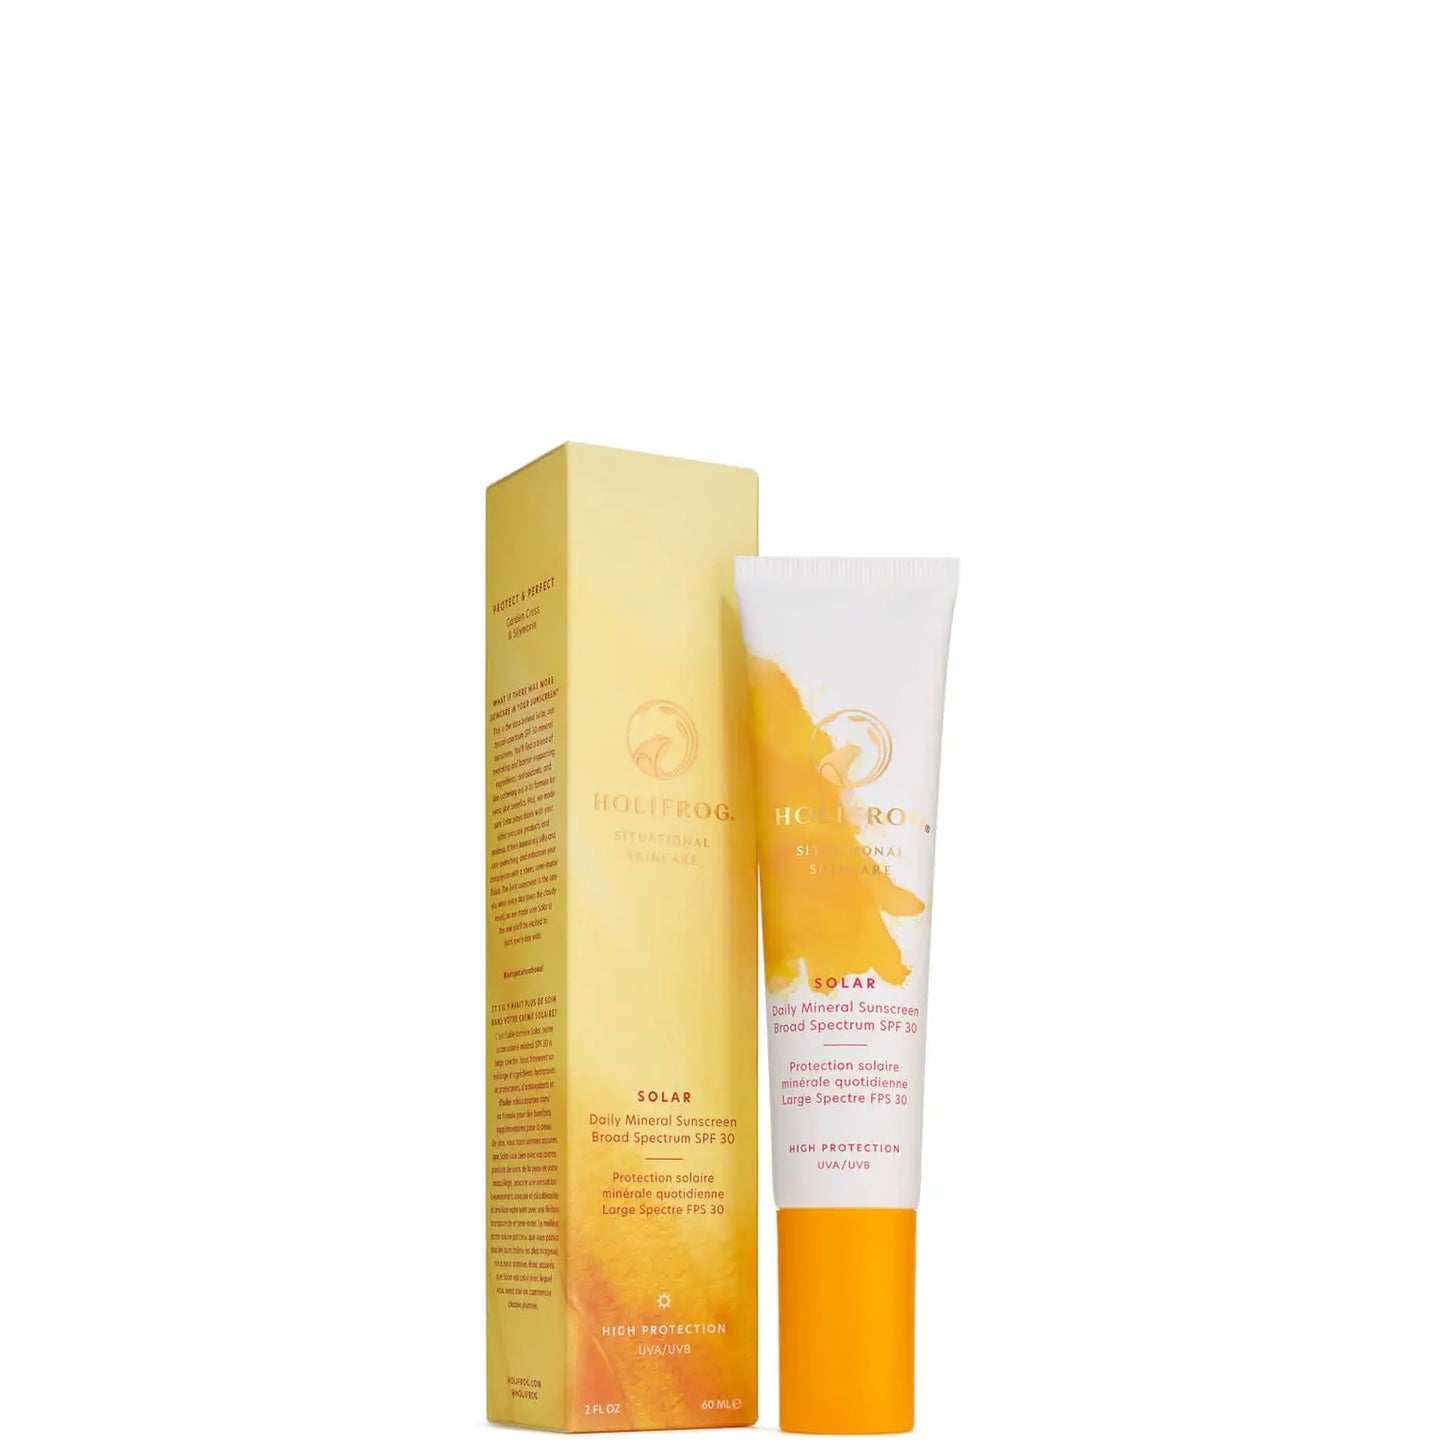 HOLIFROG | SOLAR DAILY MINERAL SUNSCREEN BROAD SPECTRUM SPF 30